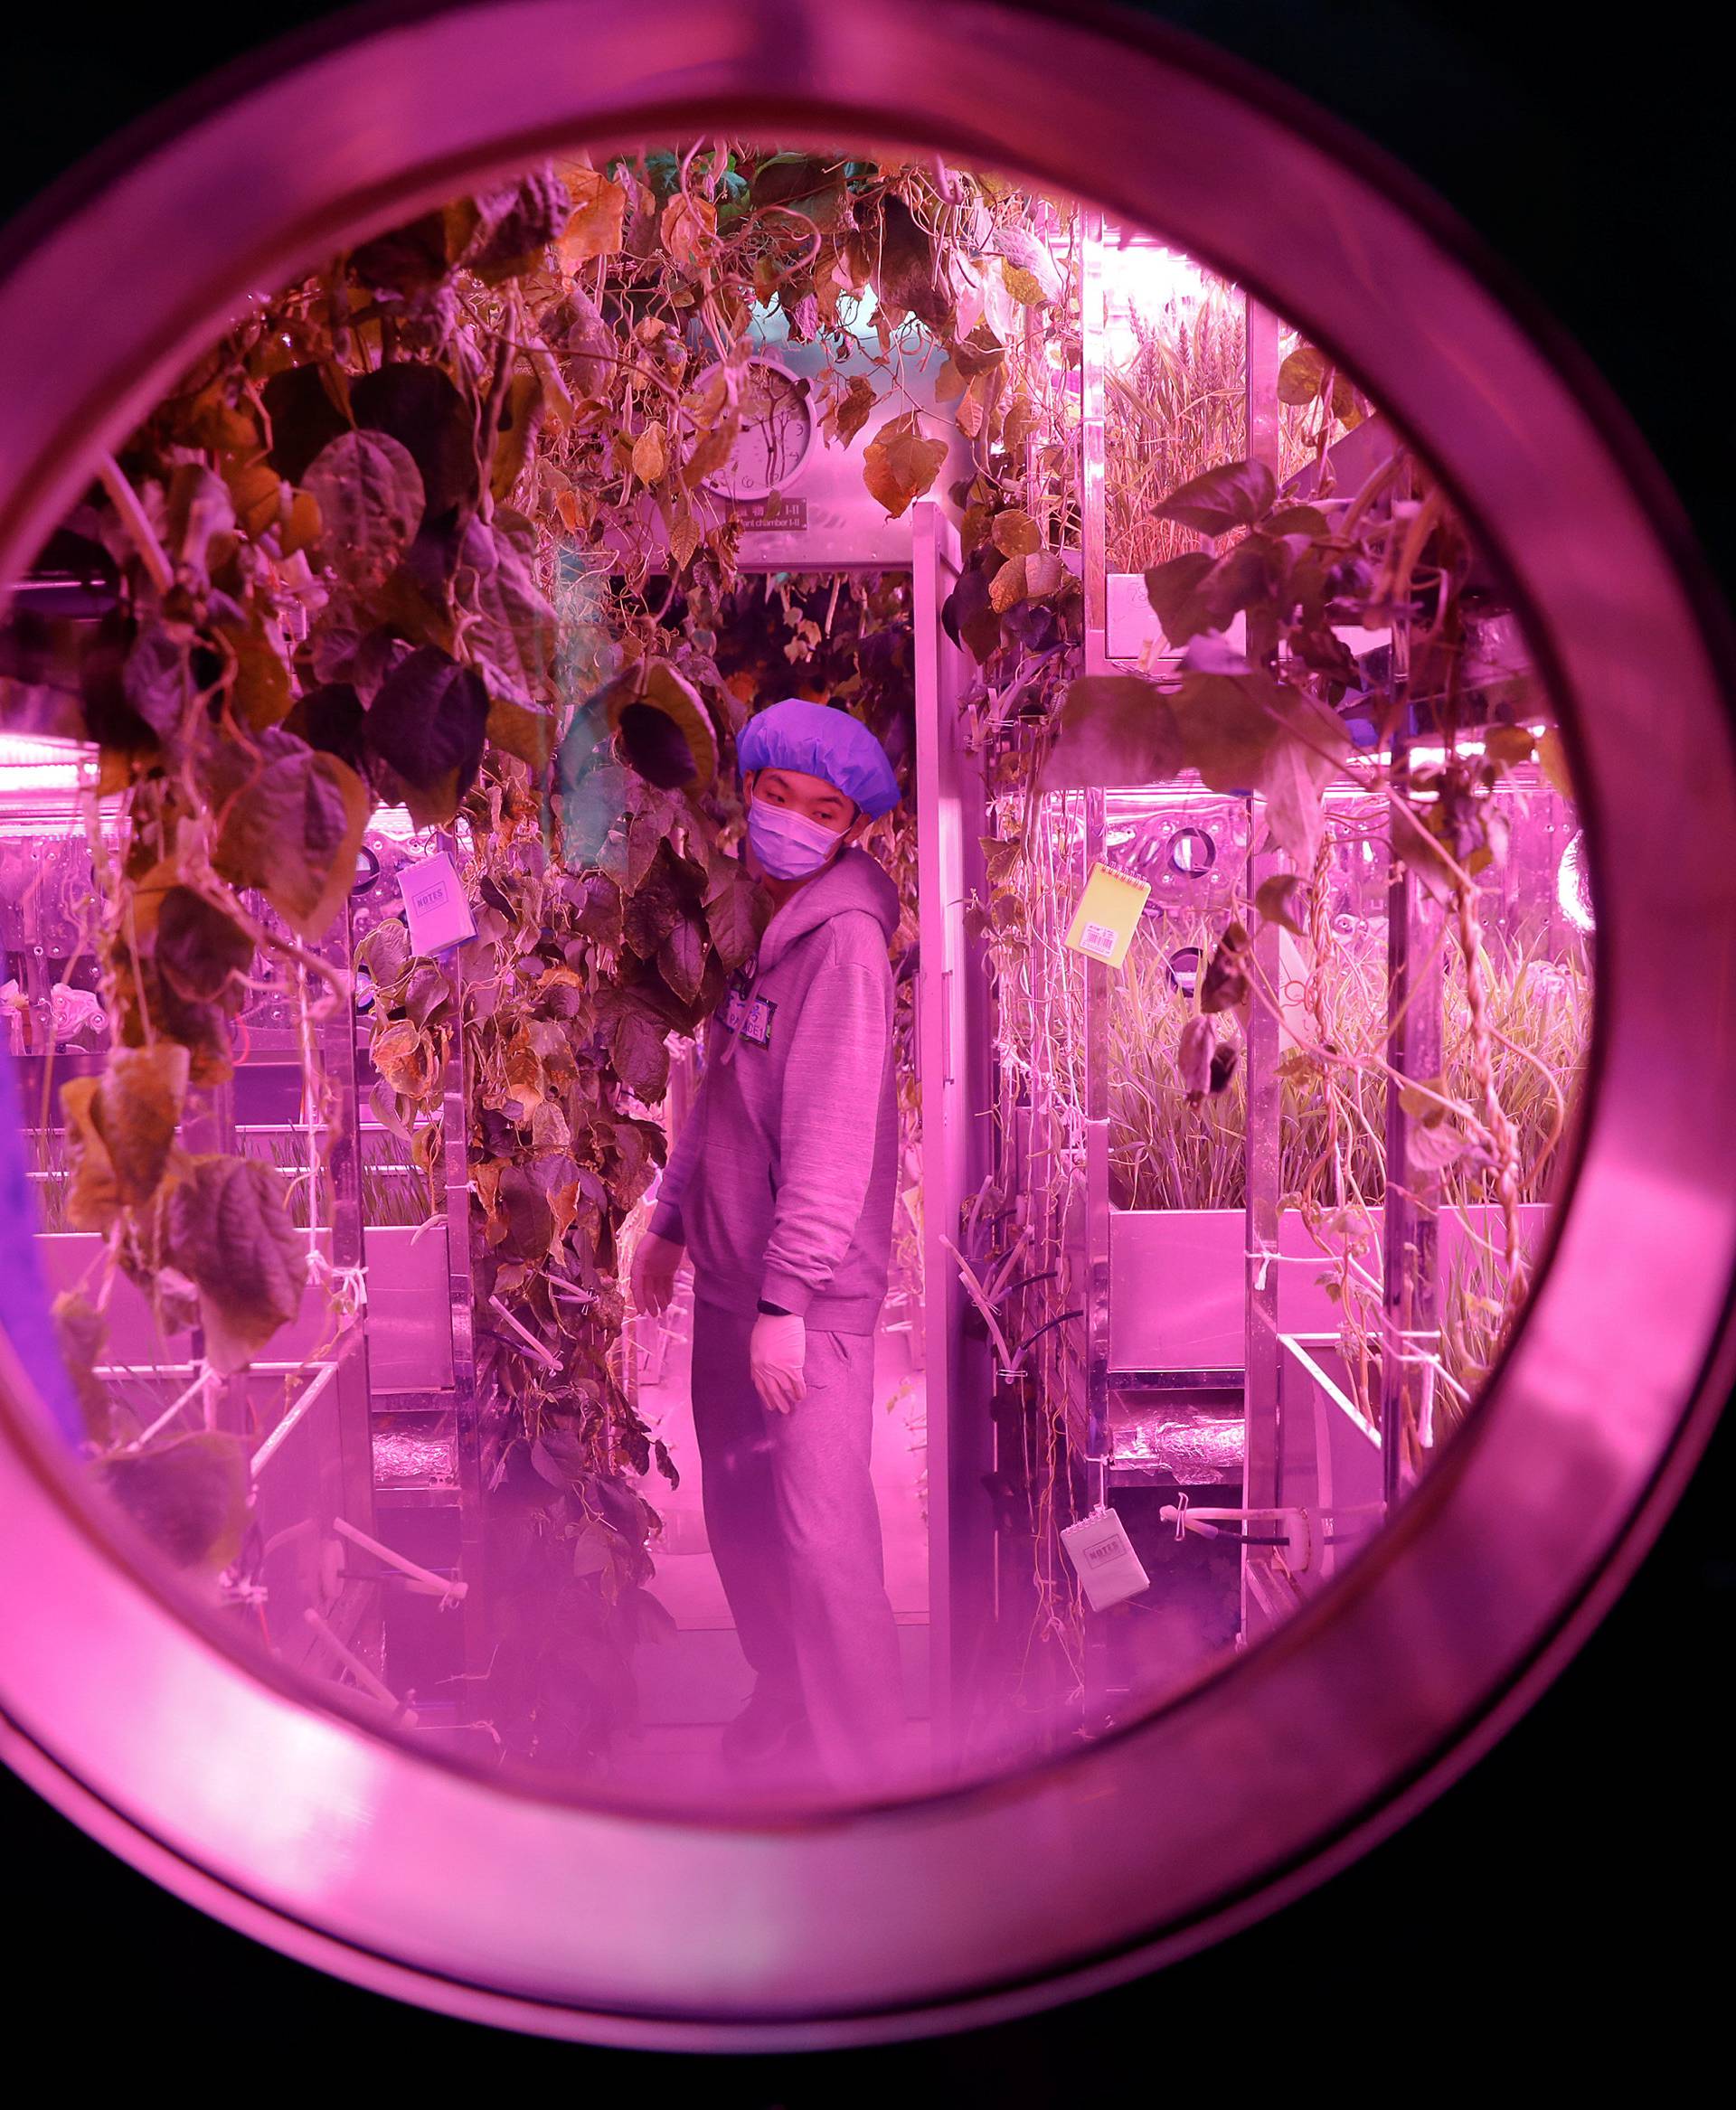 A volunteer checks on plants inside a simulated space cabin in which he temporarily lives with others as a part of the scientistic Lunar Palace 365 Project, at Beihang University in Beijing